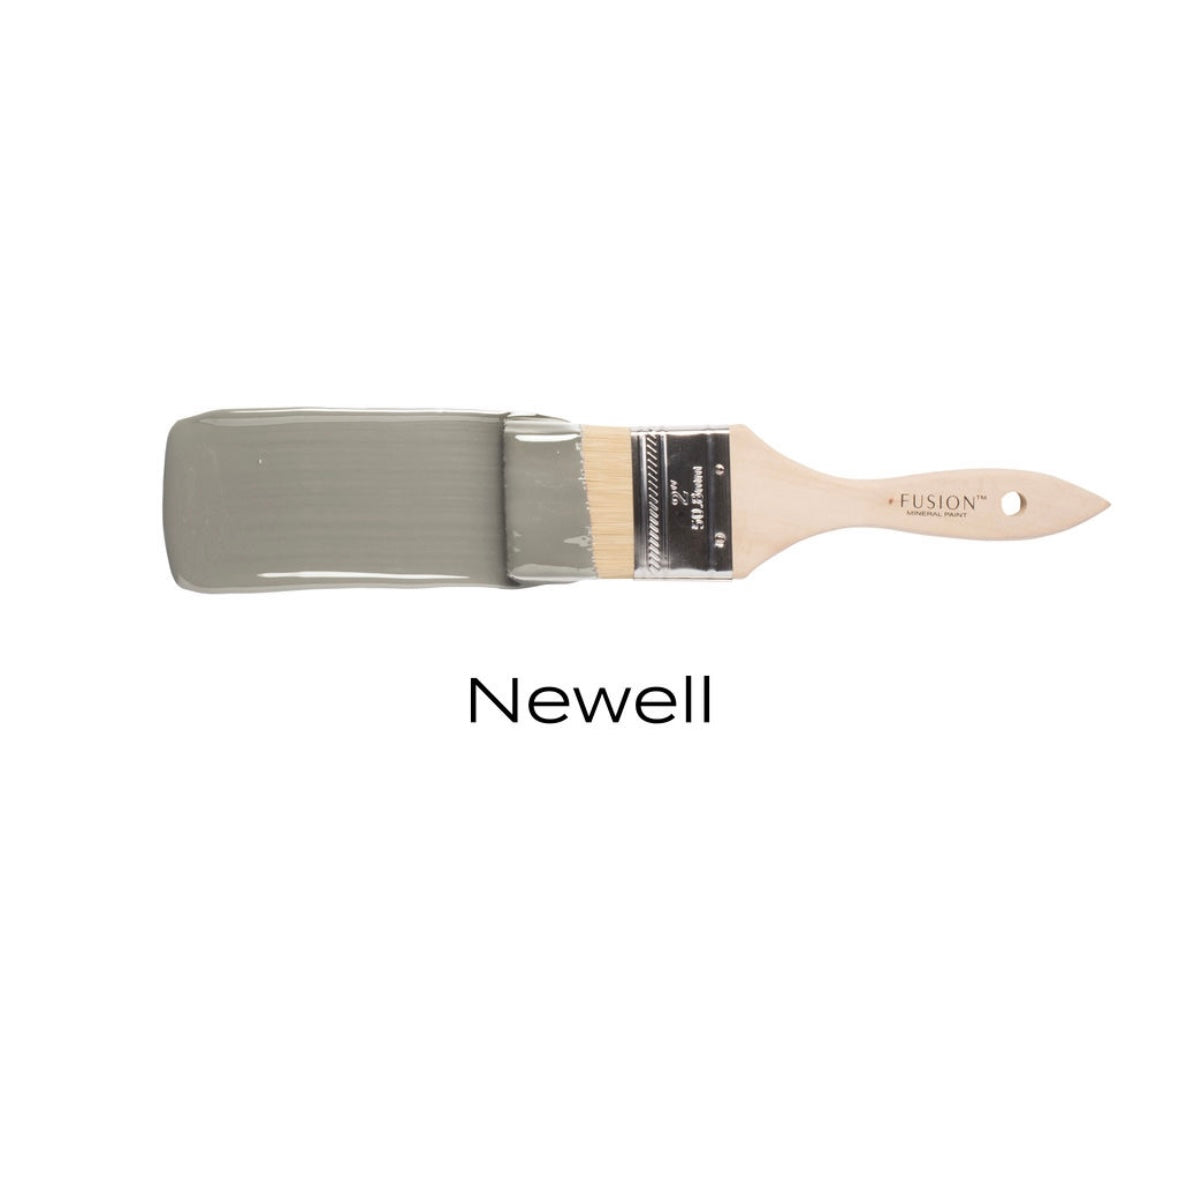 Newell by Fusion